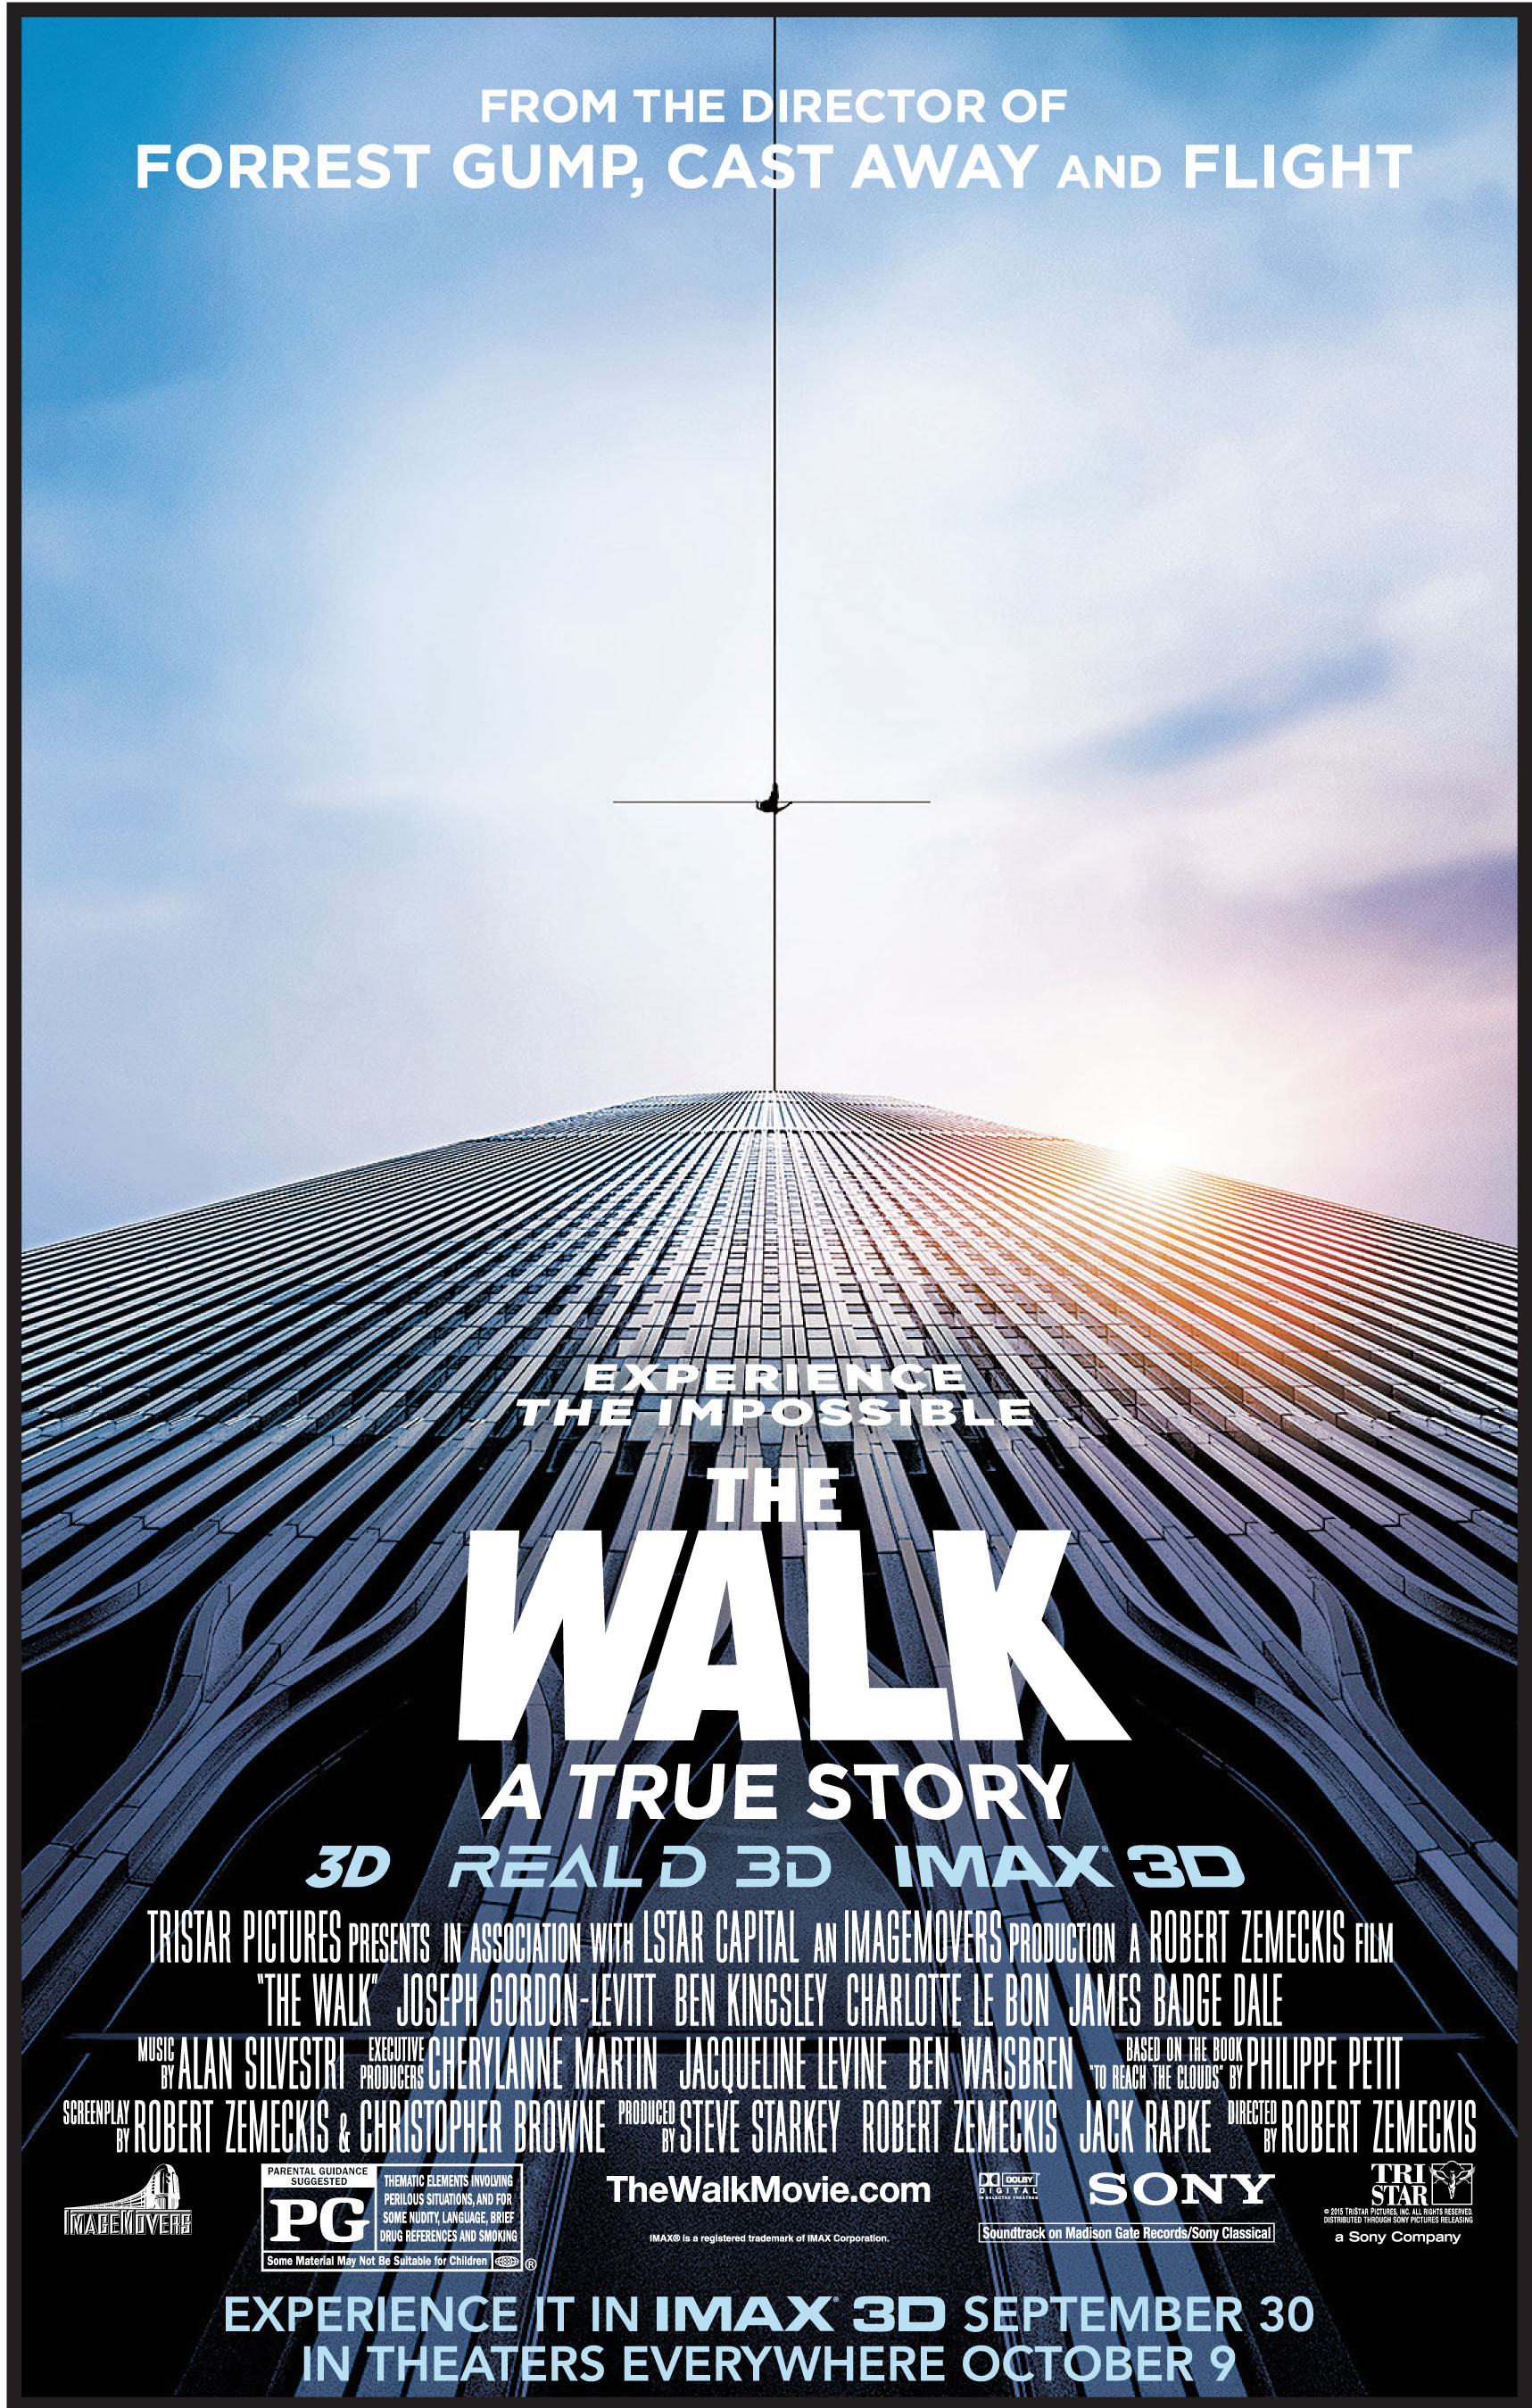 THE WALK Advance Screening is Coming to Seattle and Portland ...